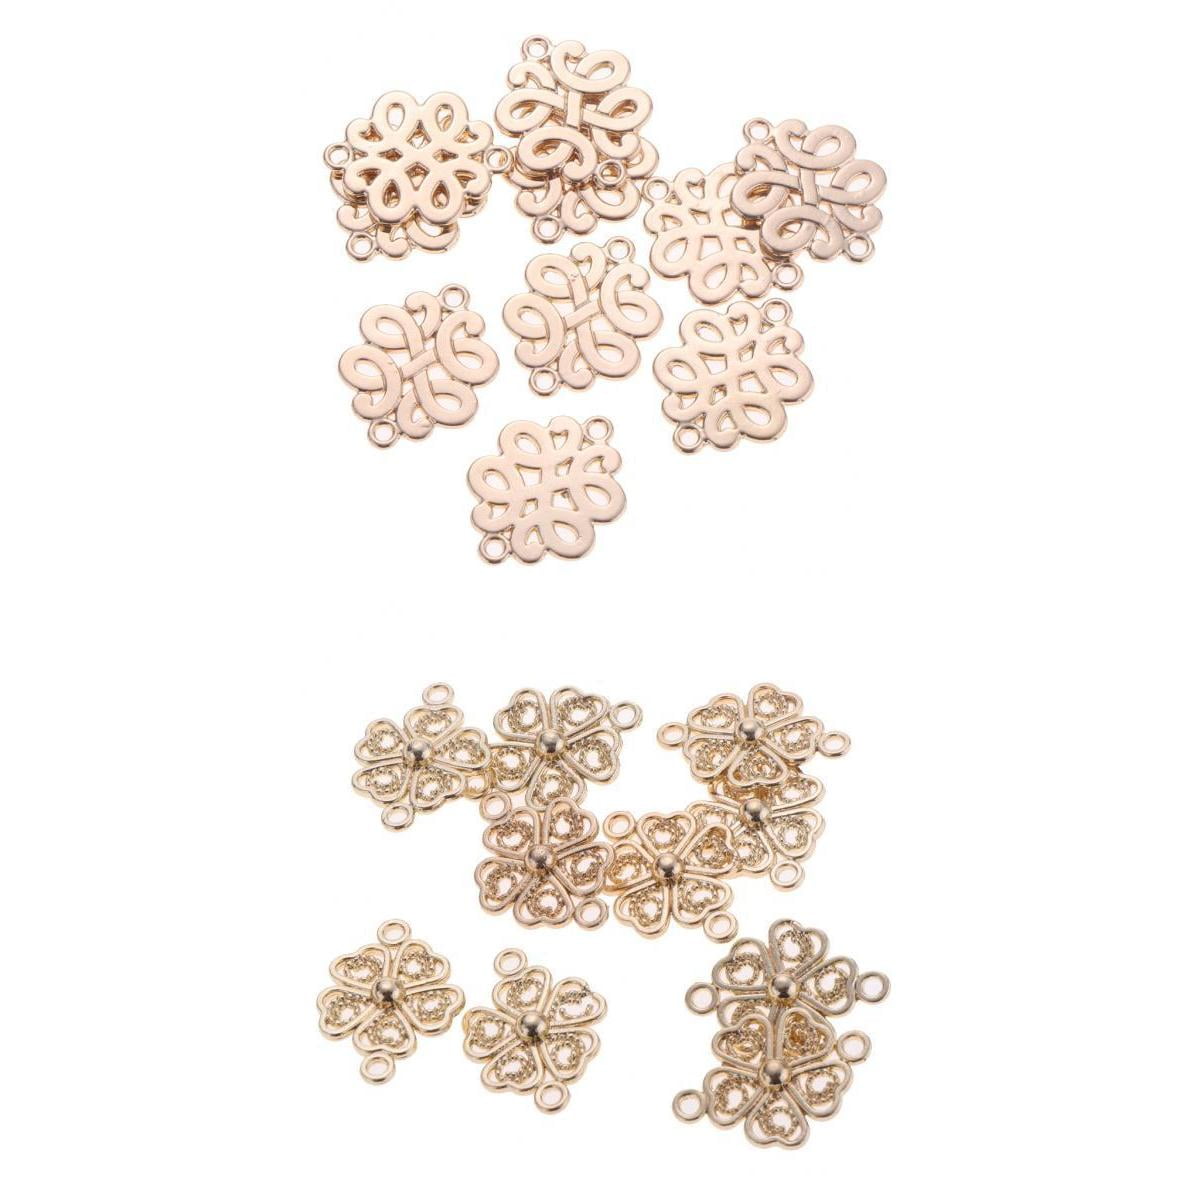 20Pcs Flower Chandelier Component Links Charms for DIY Dangle Earring Making 